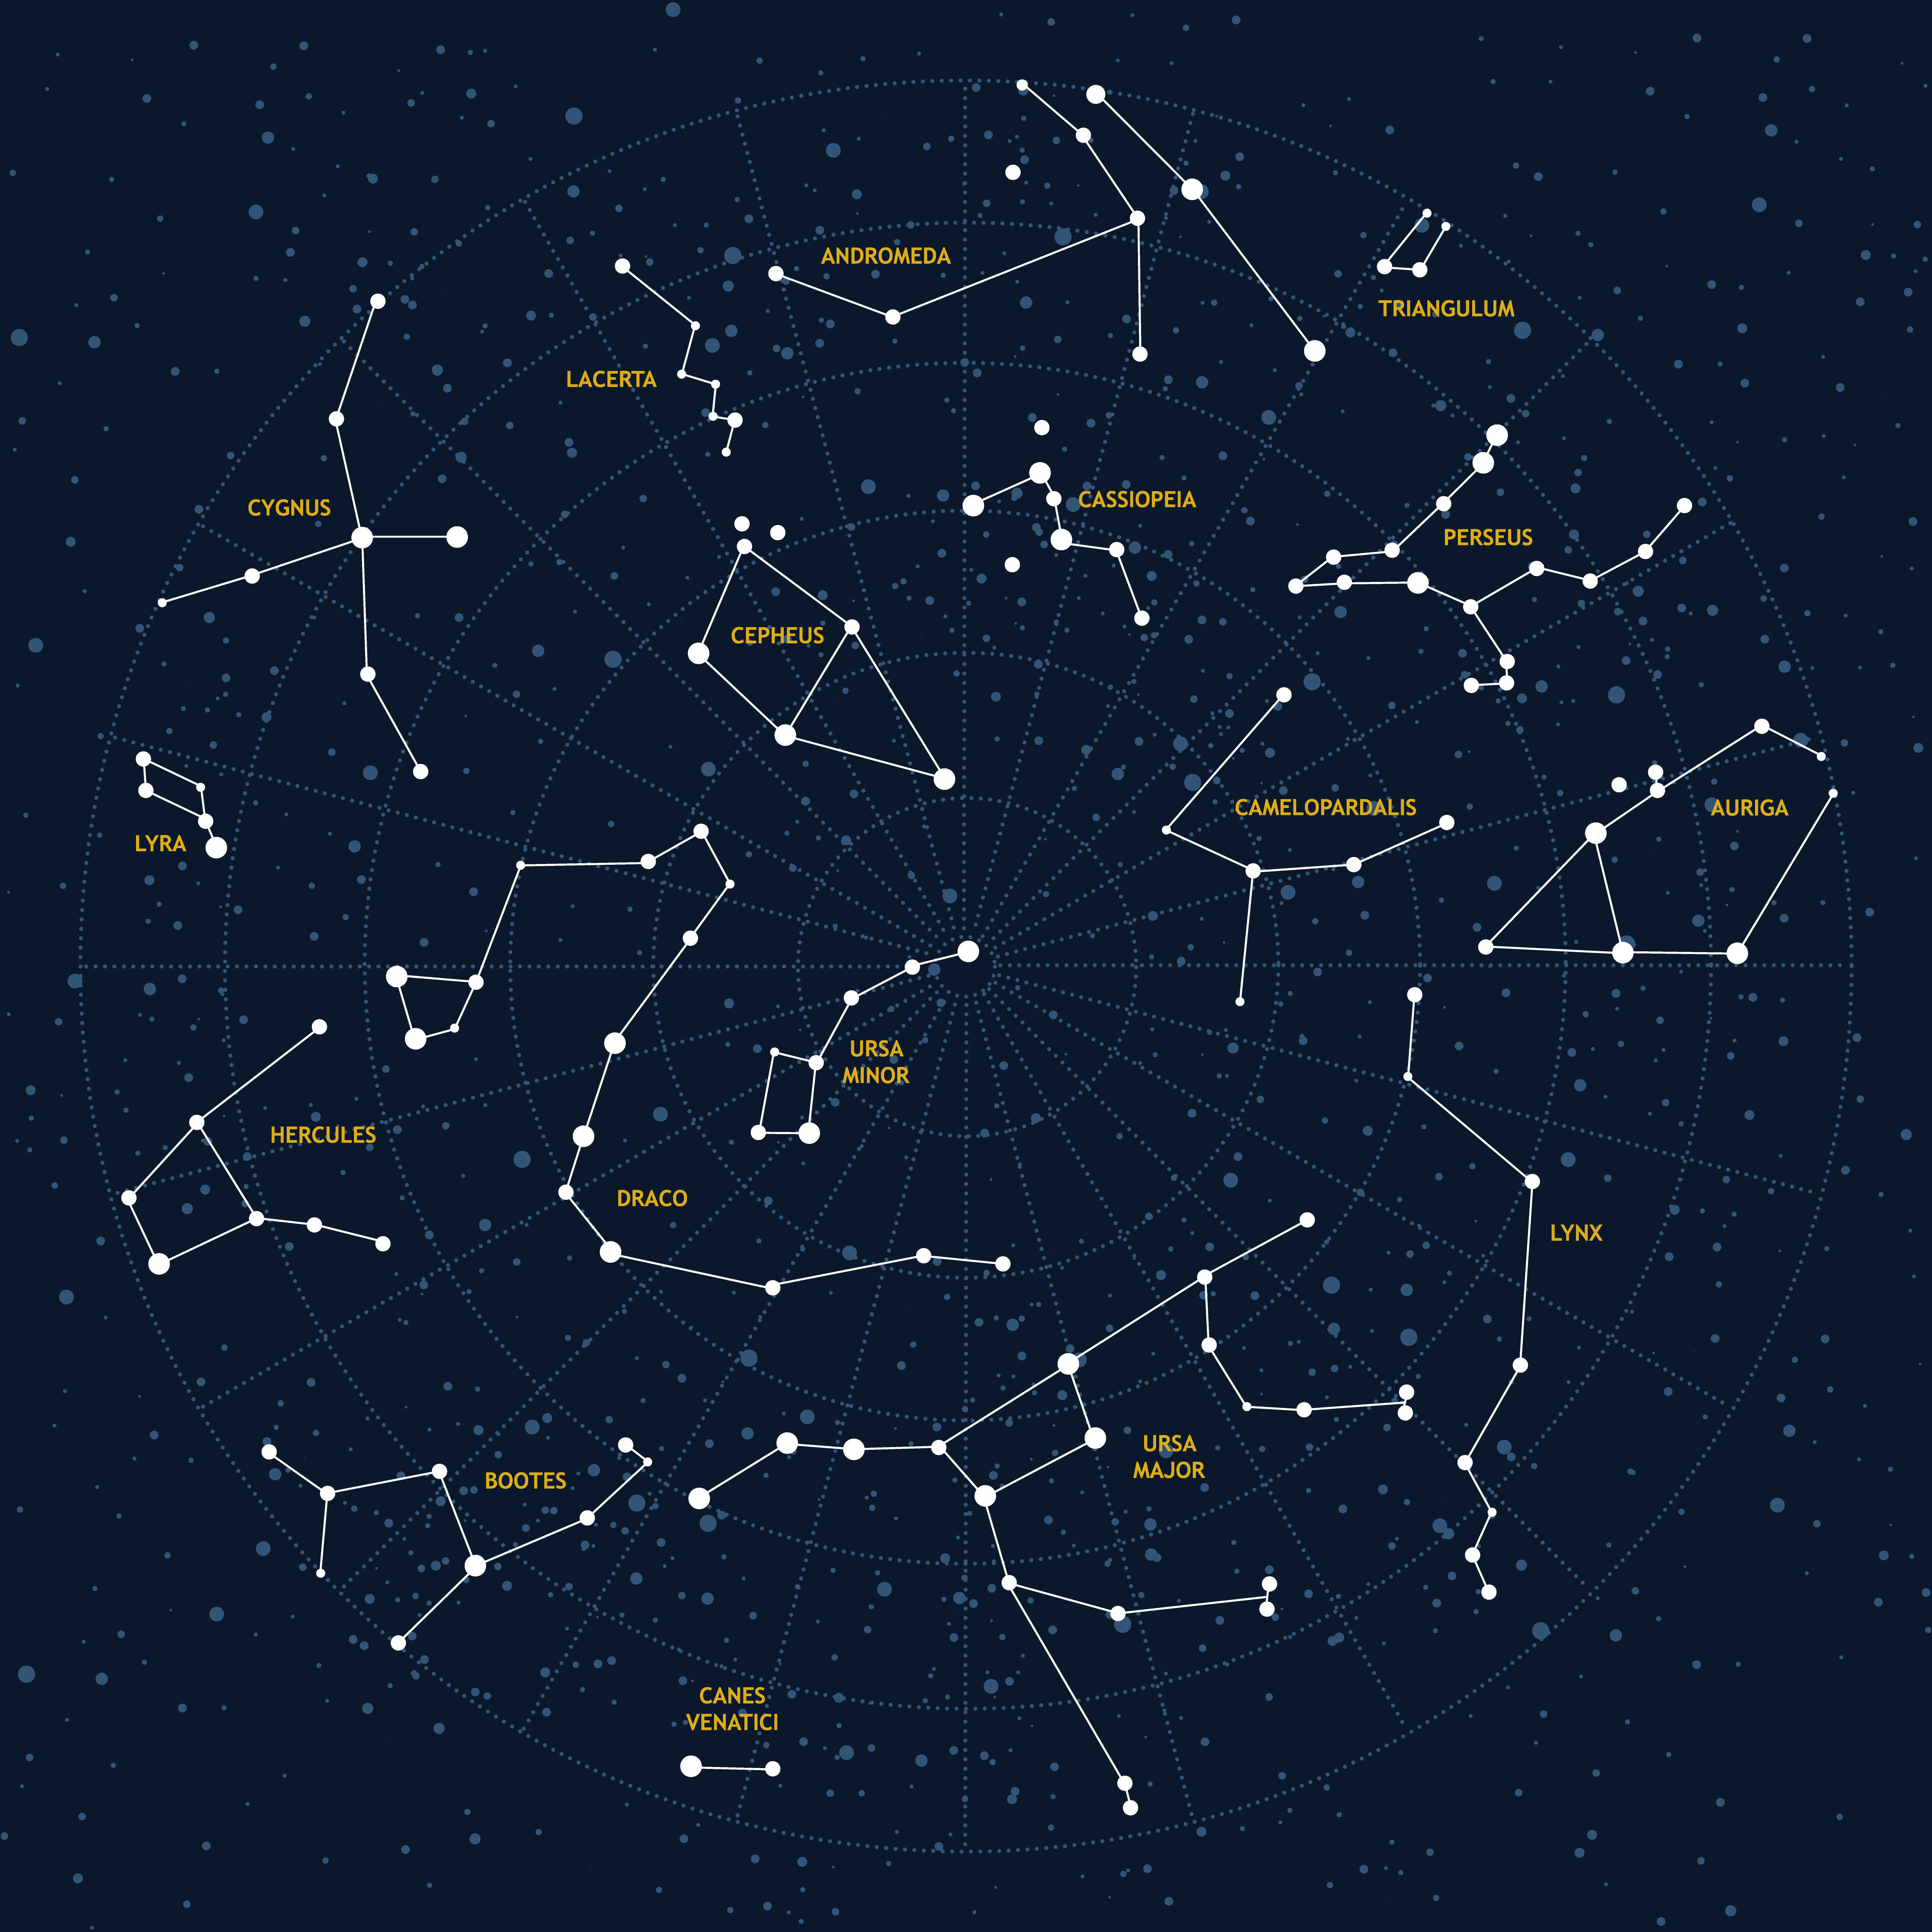 labeled constellations in the night sky